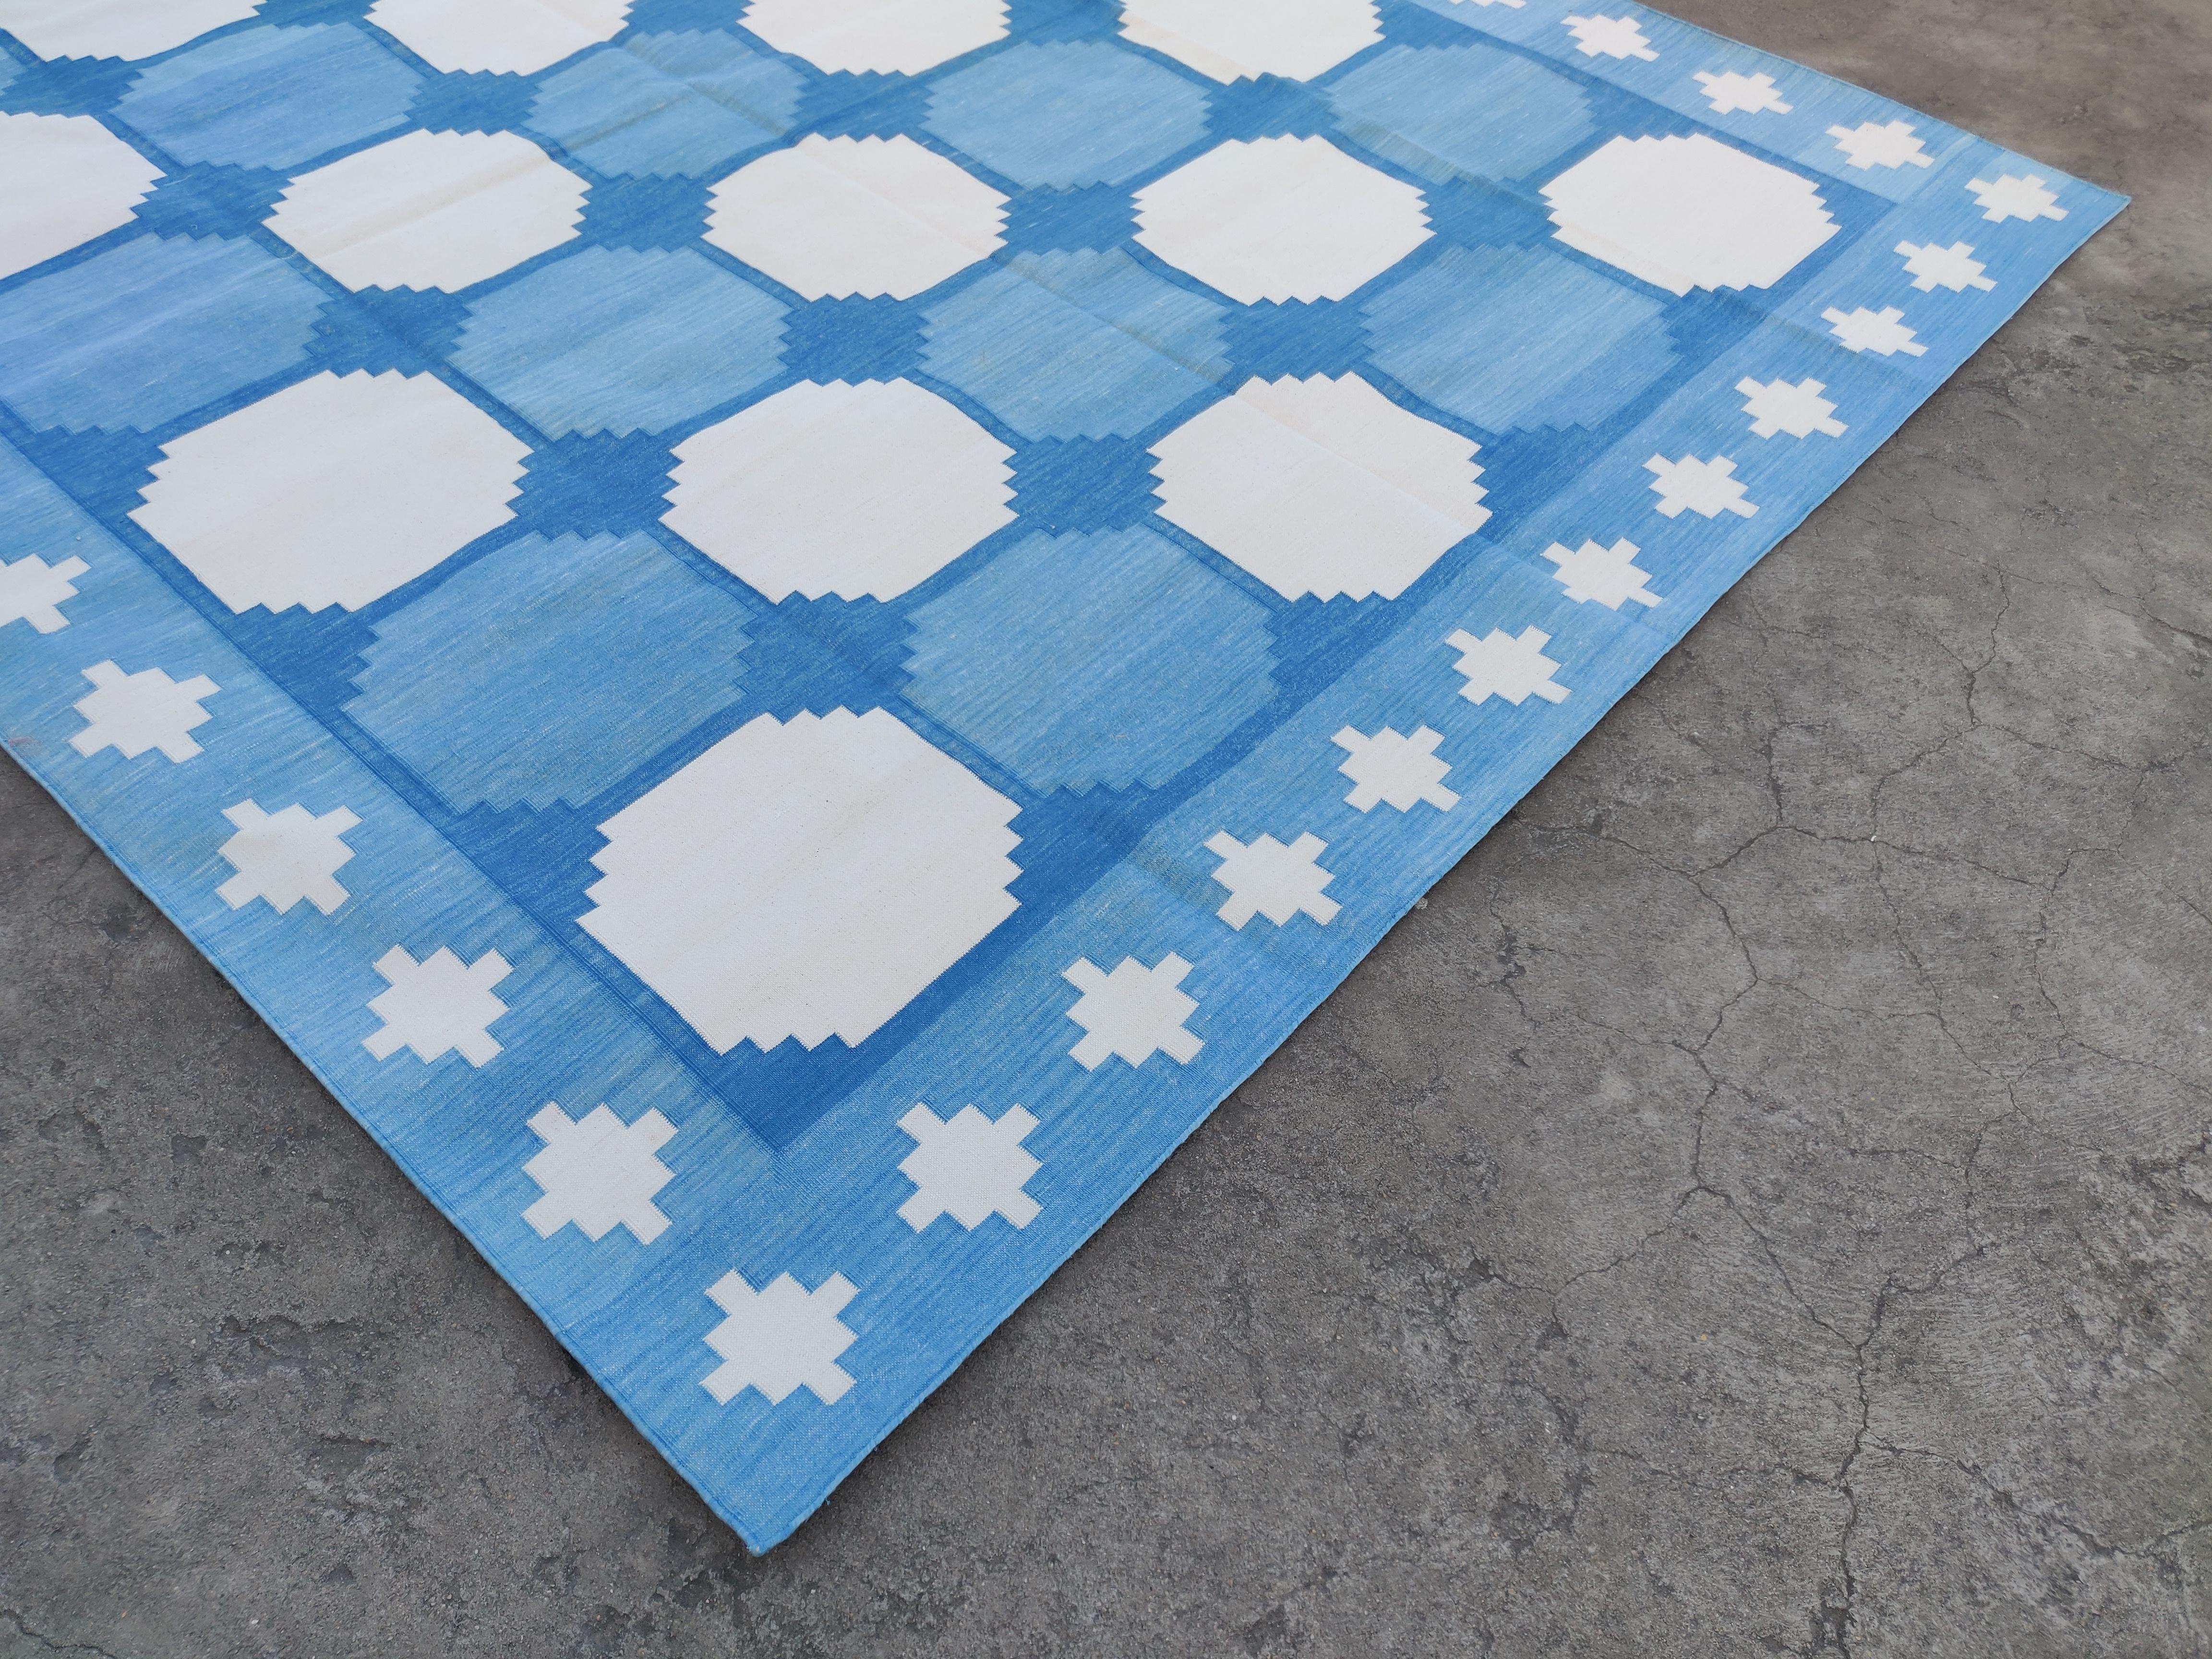 Handmade Cotton Flat Weave Rug, 8x10 Blue And White Tile Pattern Indian Dhurrie In New Condition For Sale In Jaipur, IN